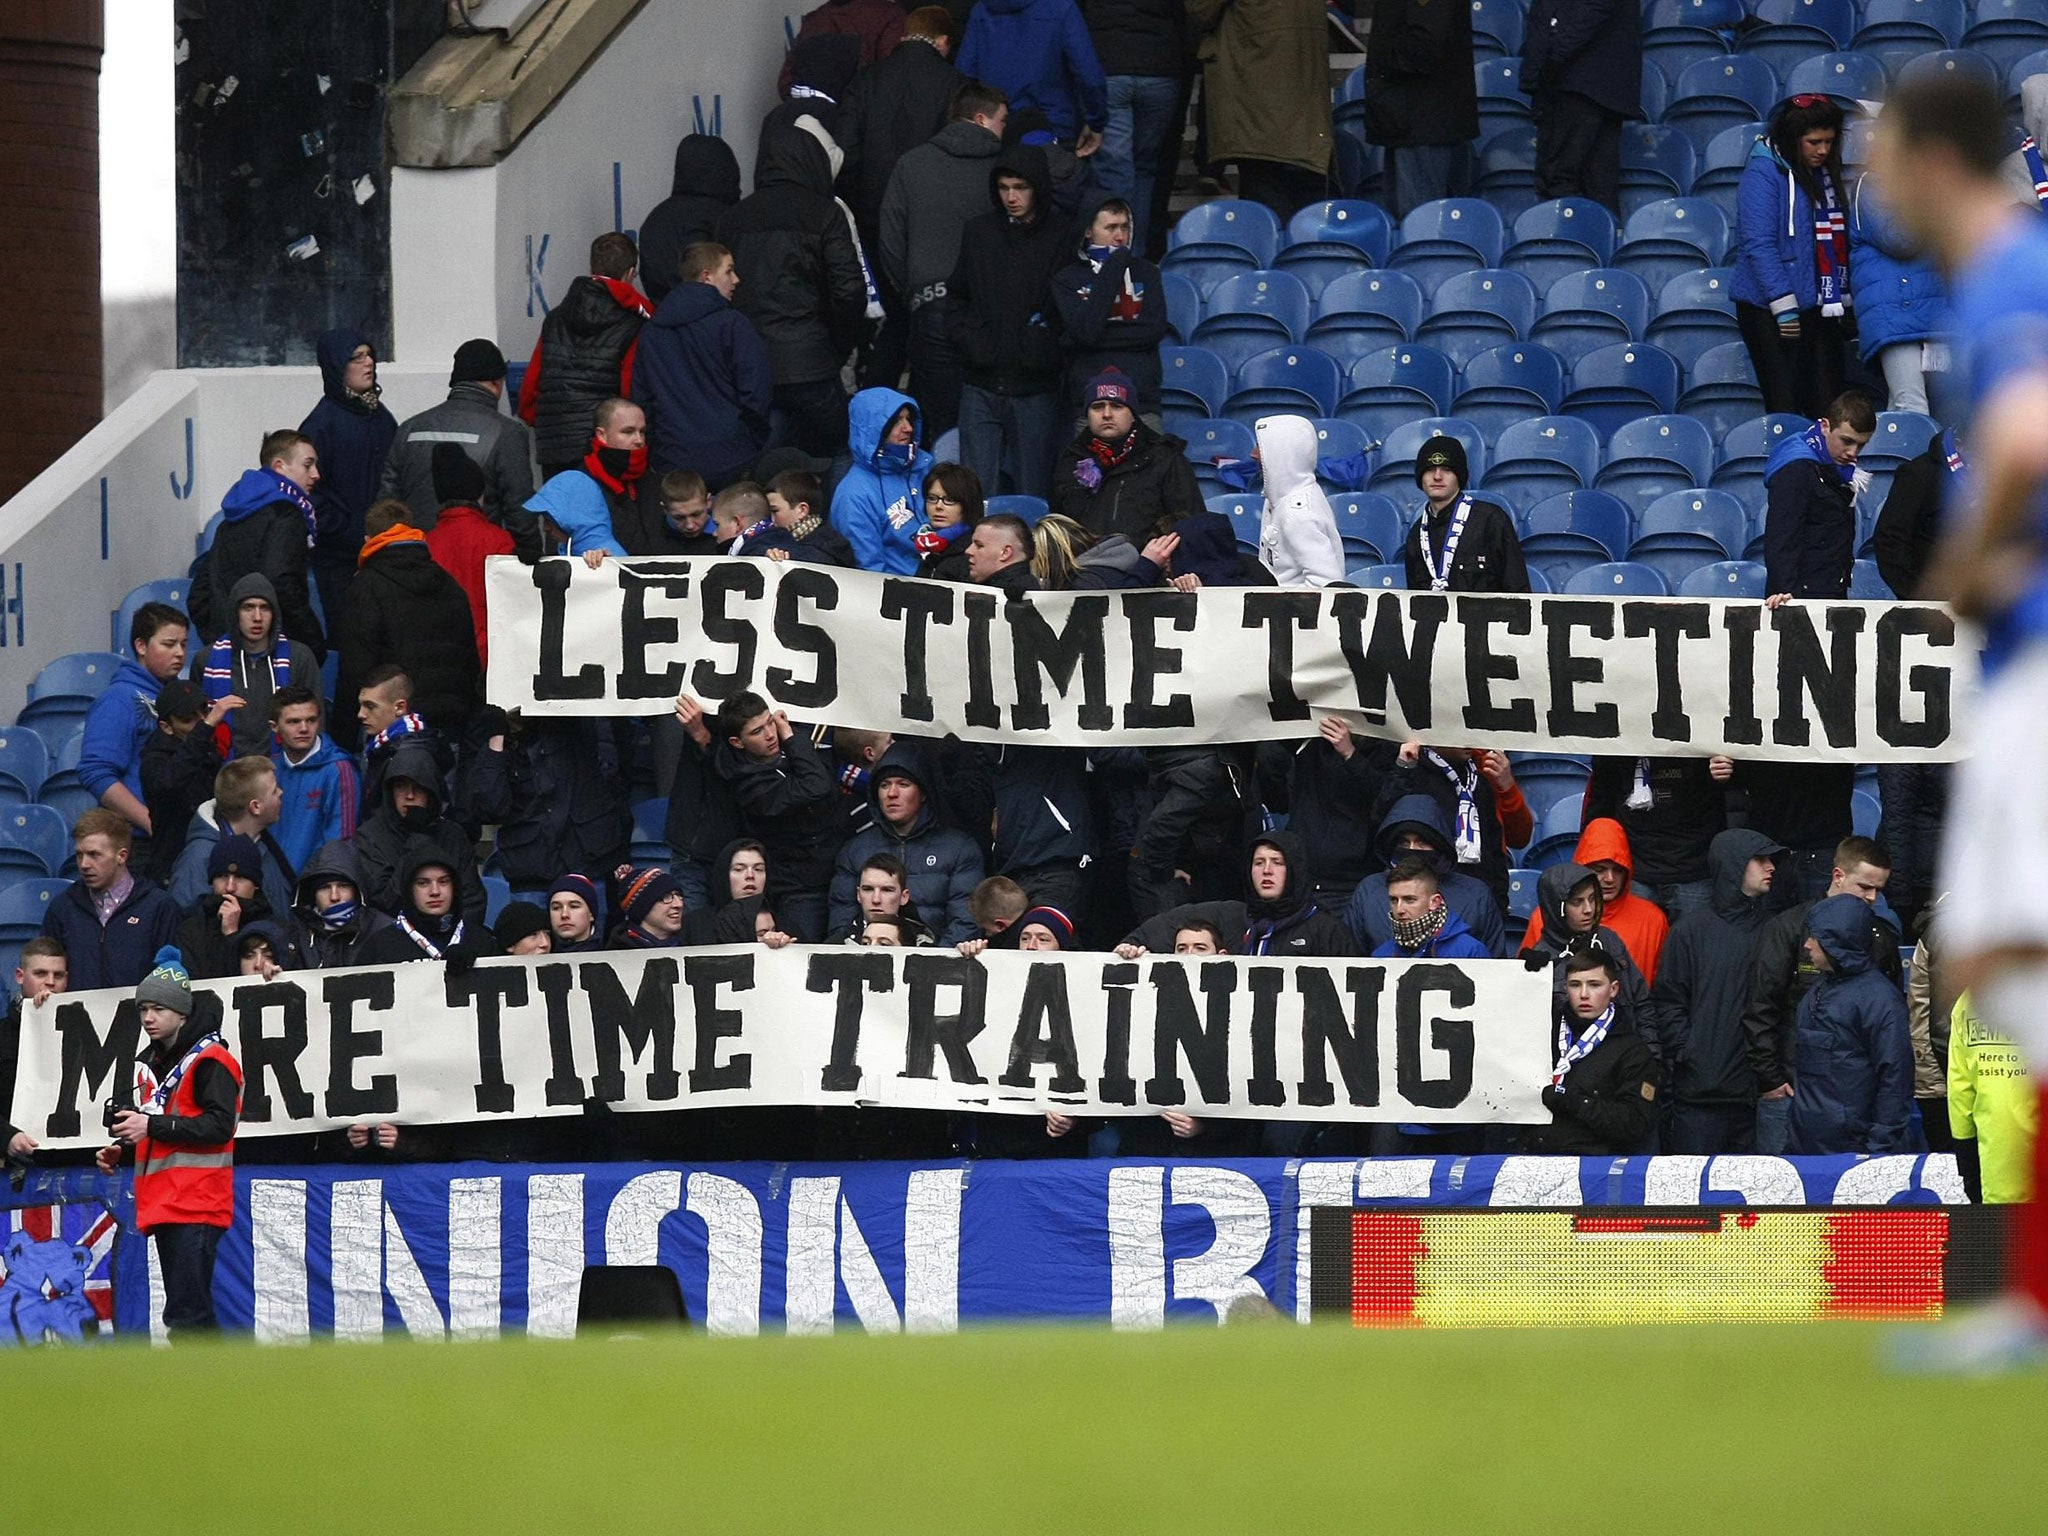 Sign of the times: Rangers fans unveil a banner reacting to poor recent form